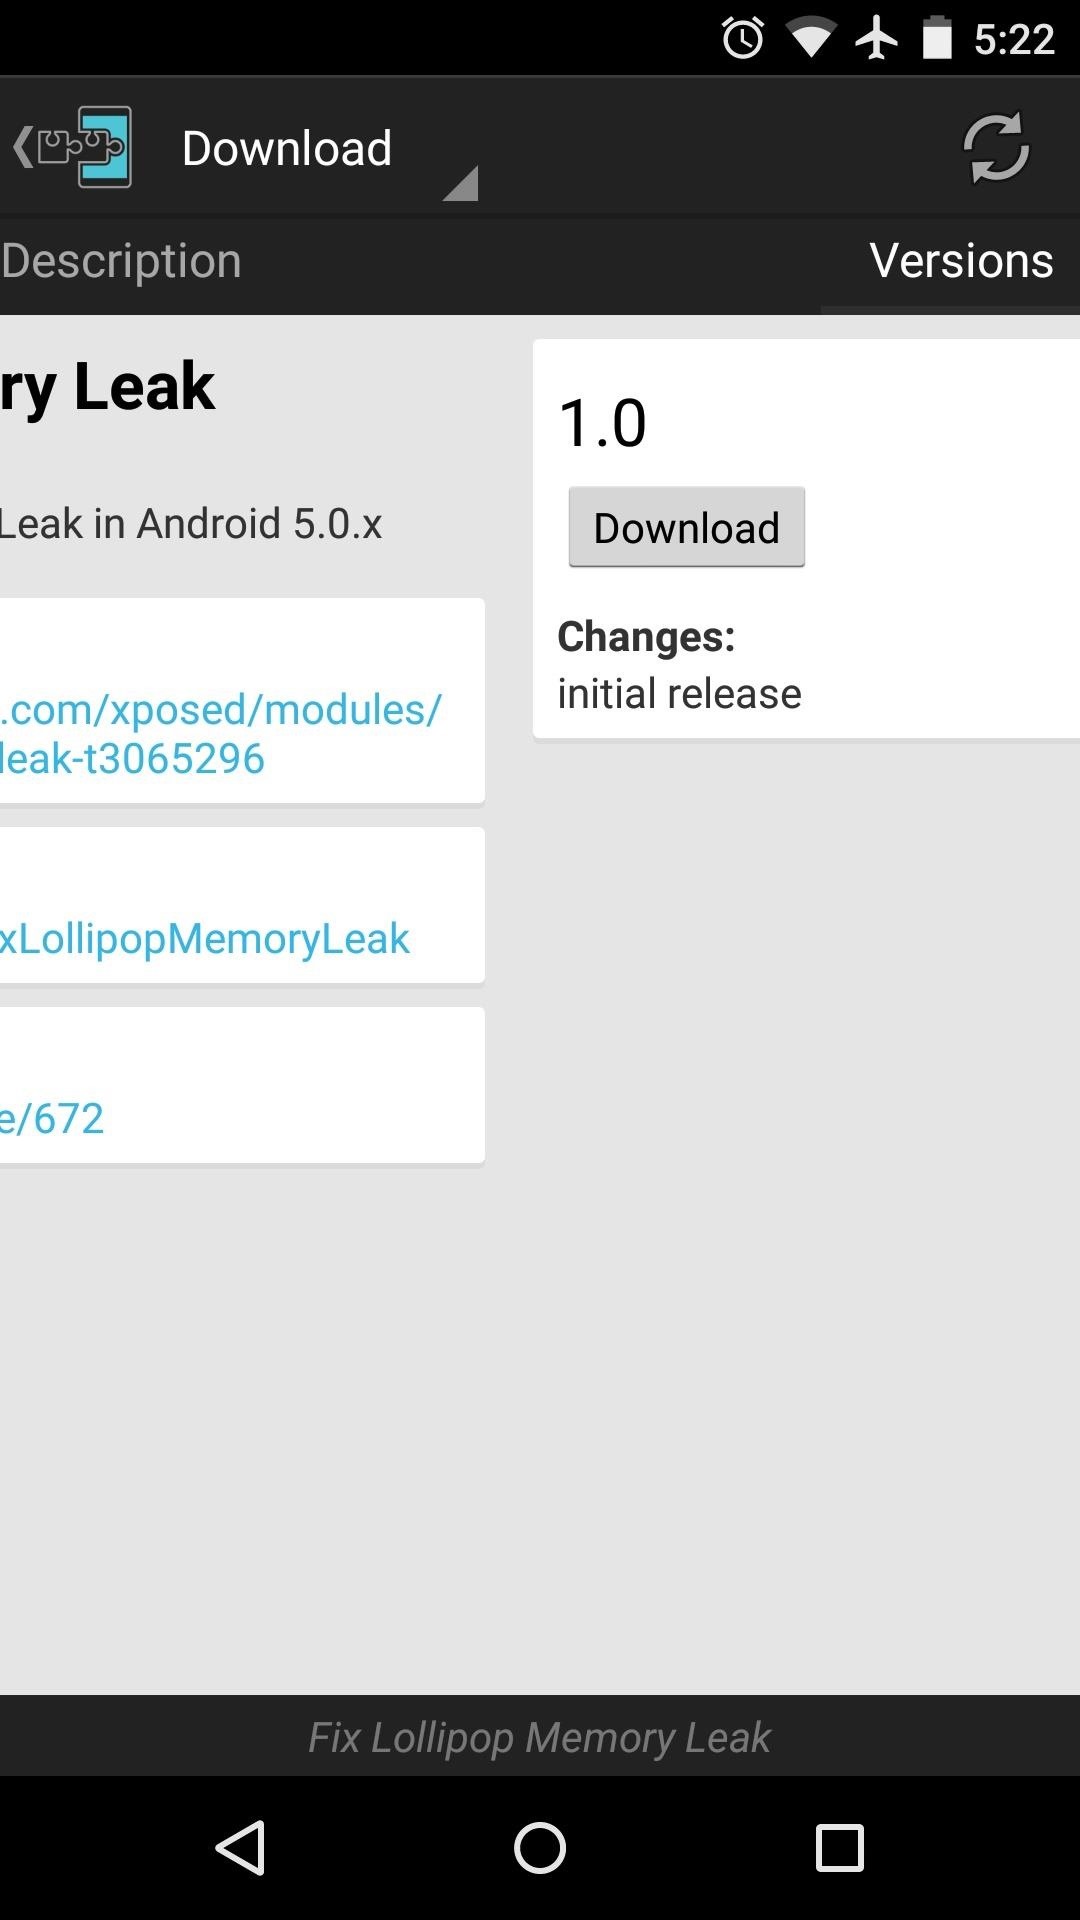 How to Fix Android Lollipop's Memory Leak for Improved Performance